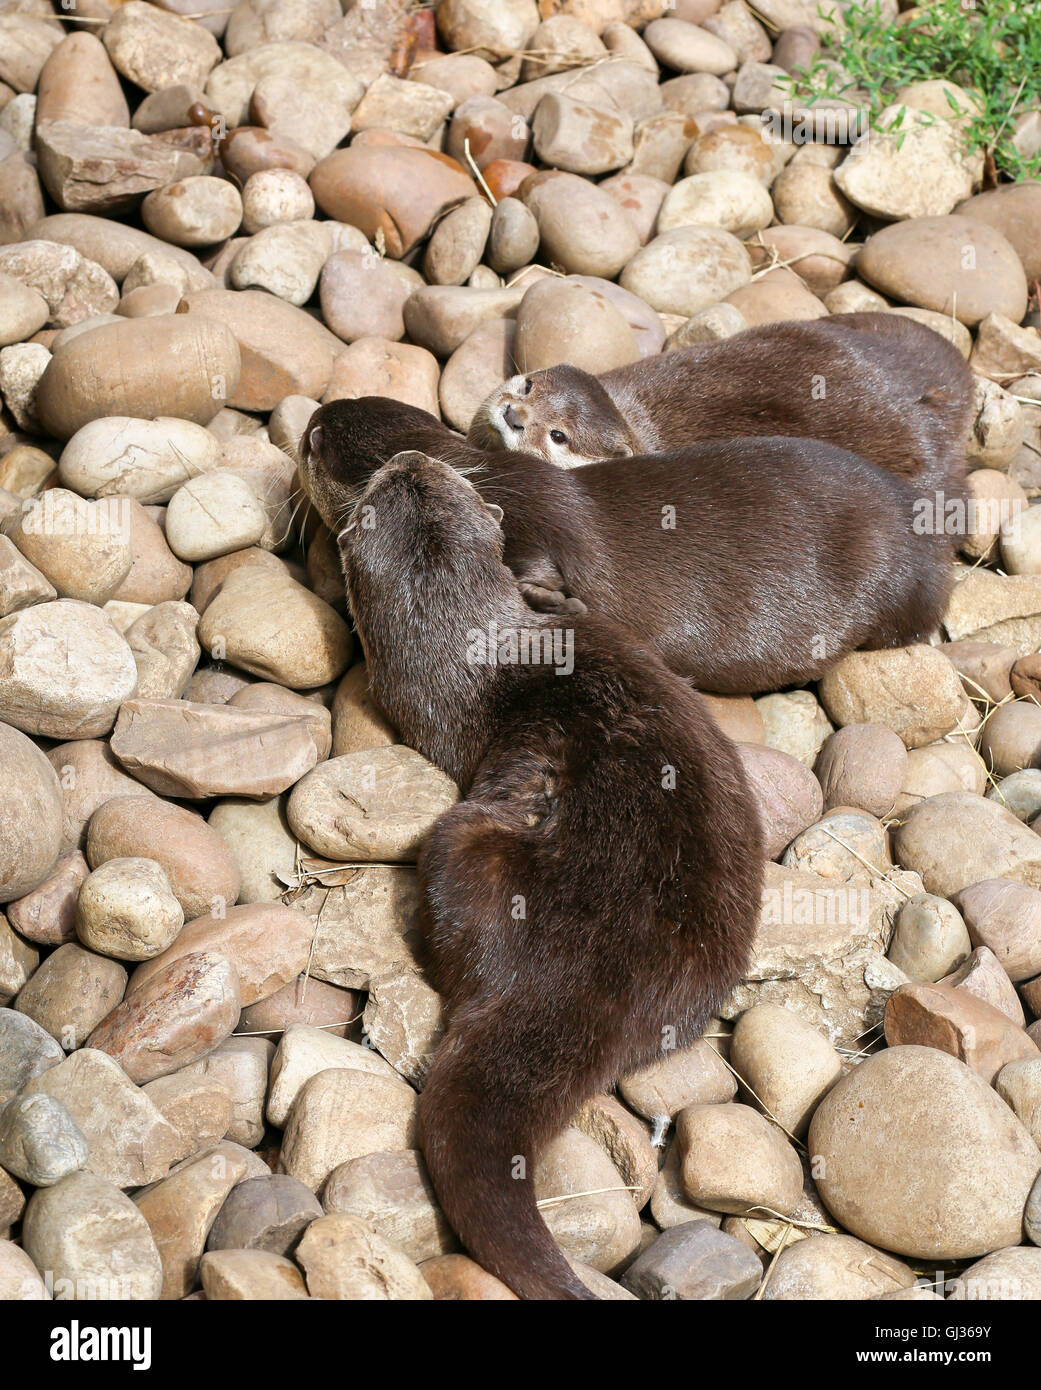 Oriental small-clawed otter family sleeping on the rock, Lazy group of young Asian short-clawed otters. Stock Photo